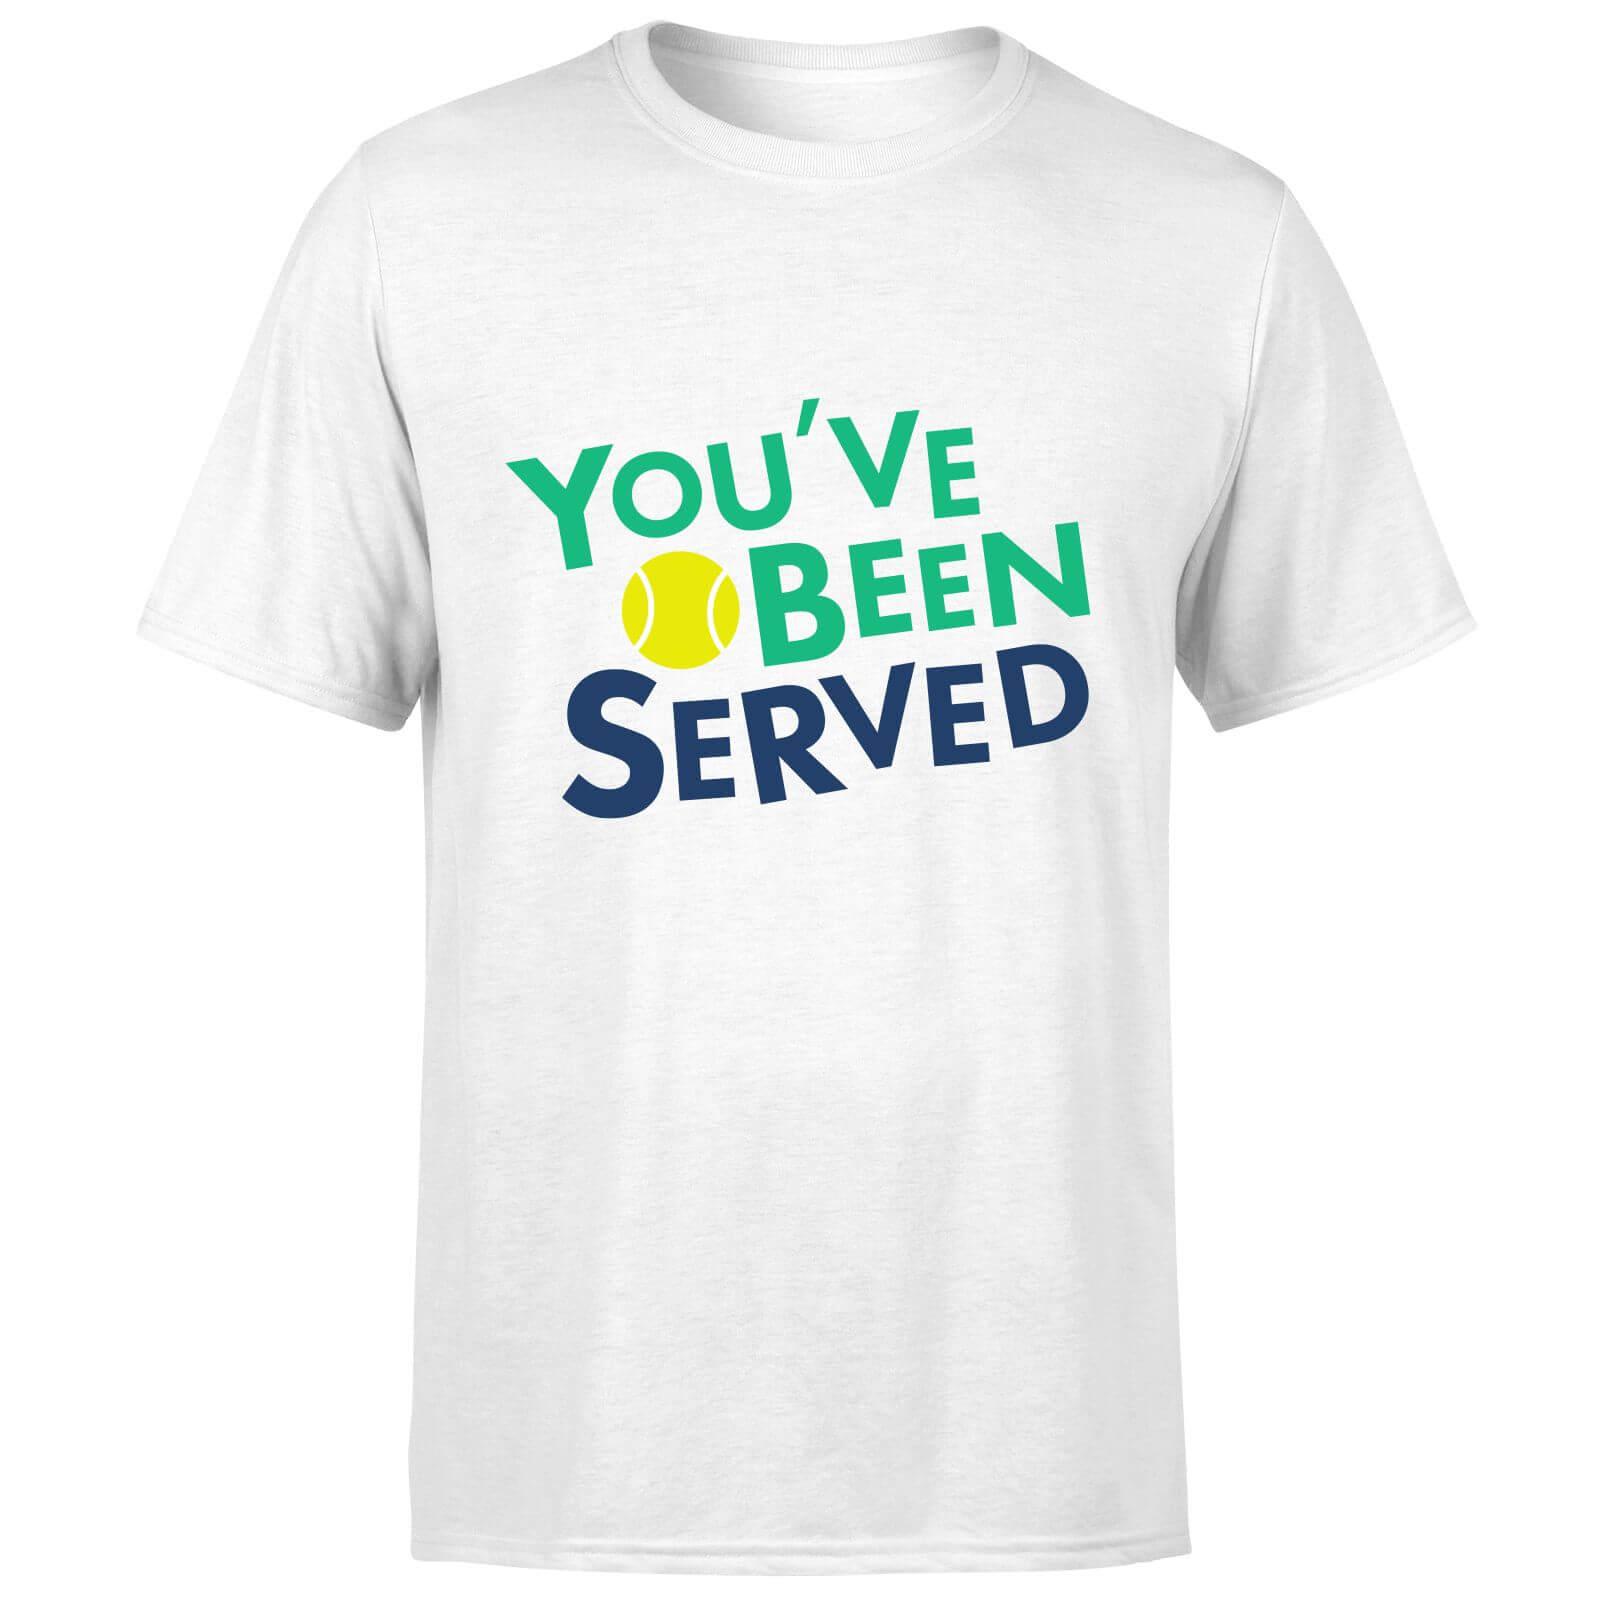 You've Been Served T-Shirt - White - XXL - White